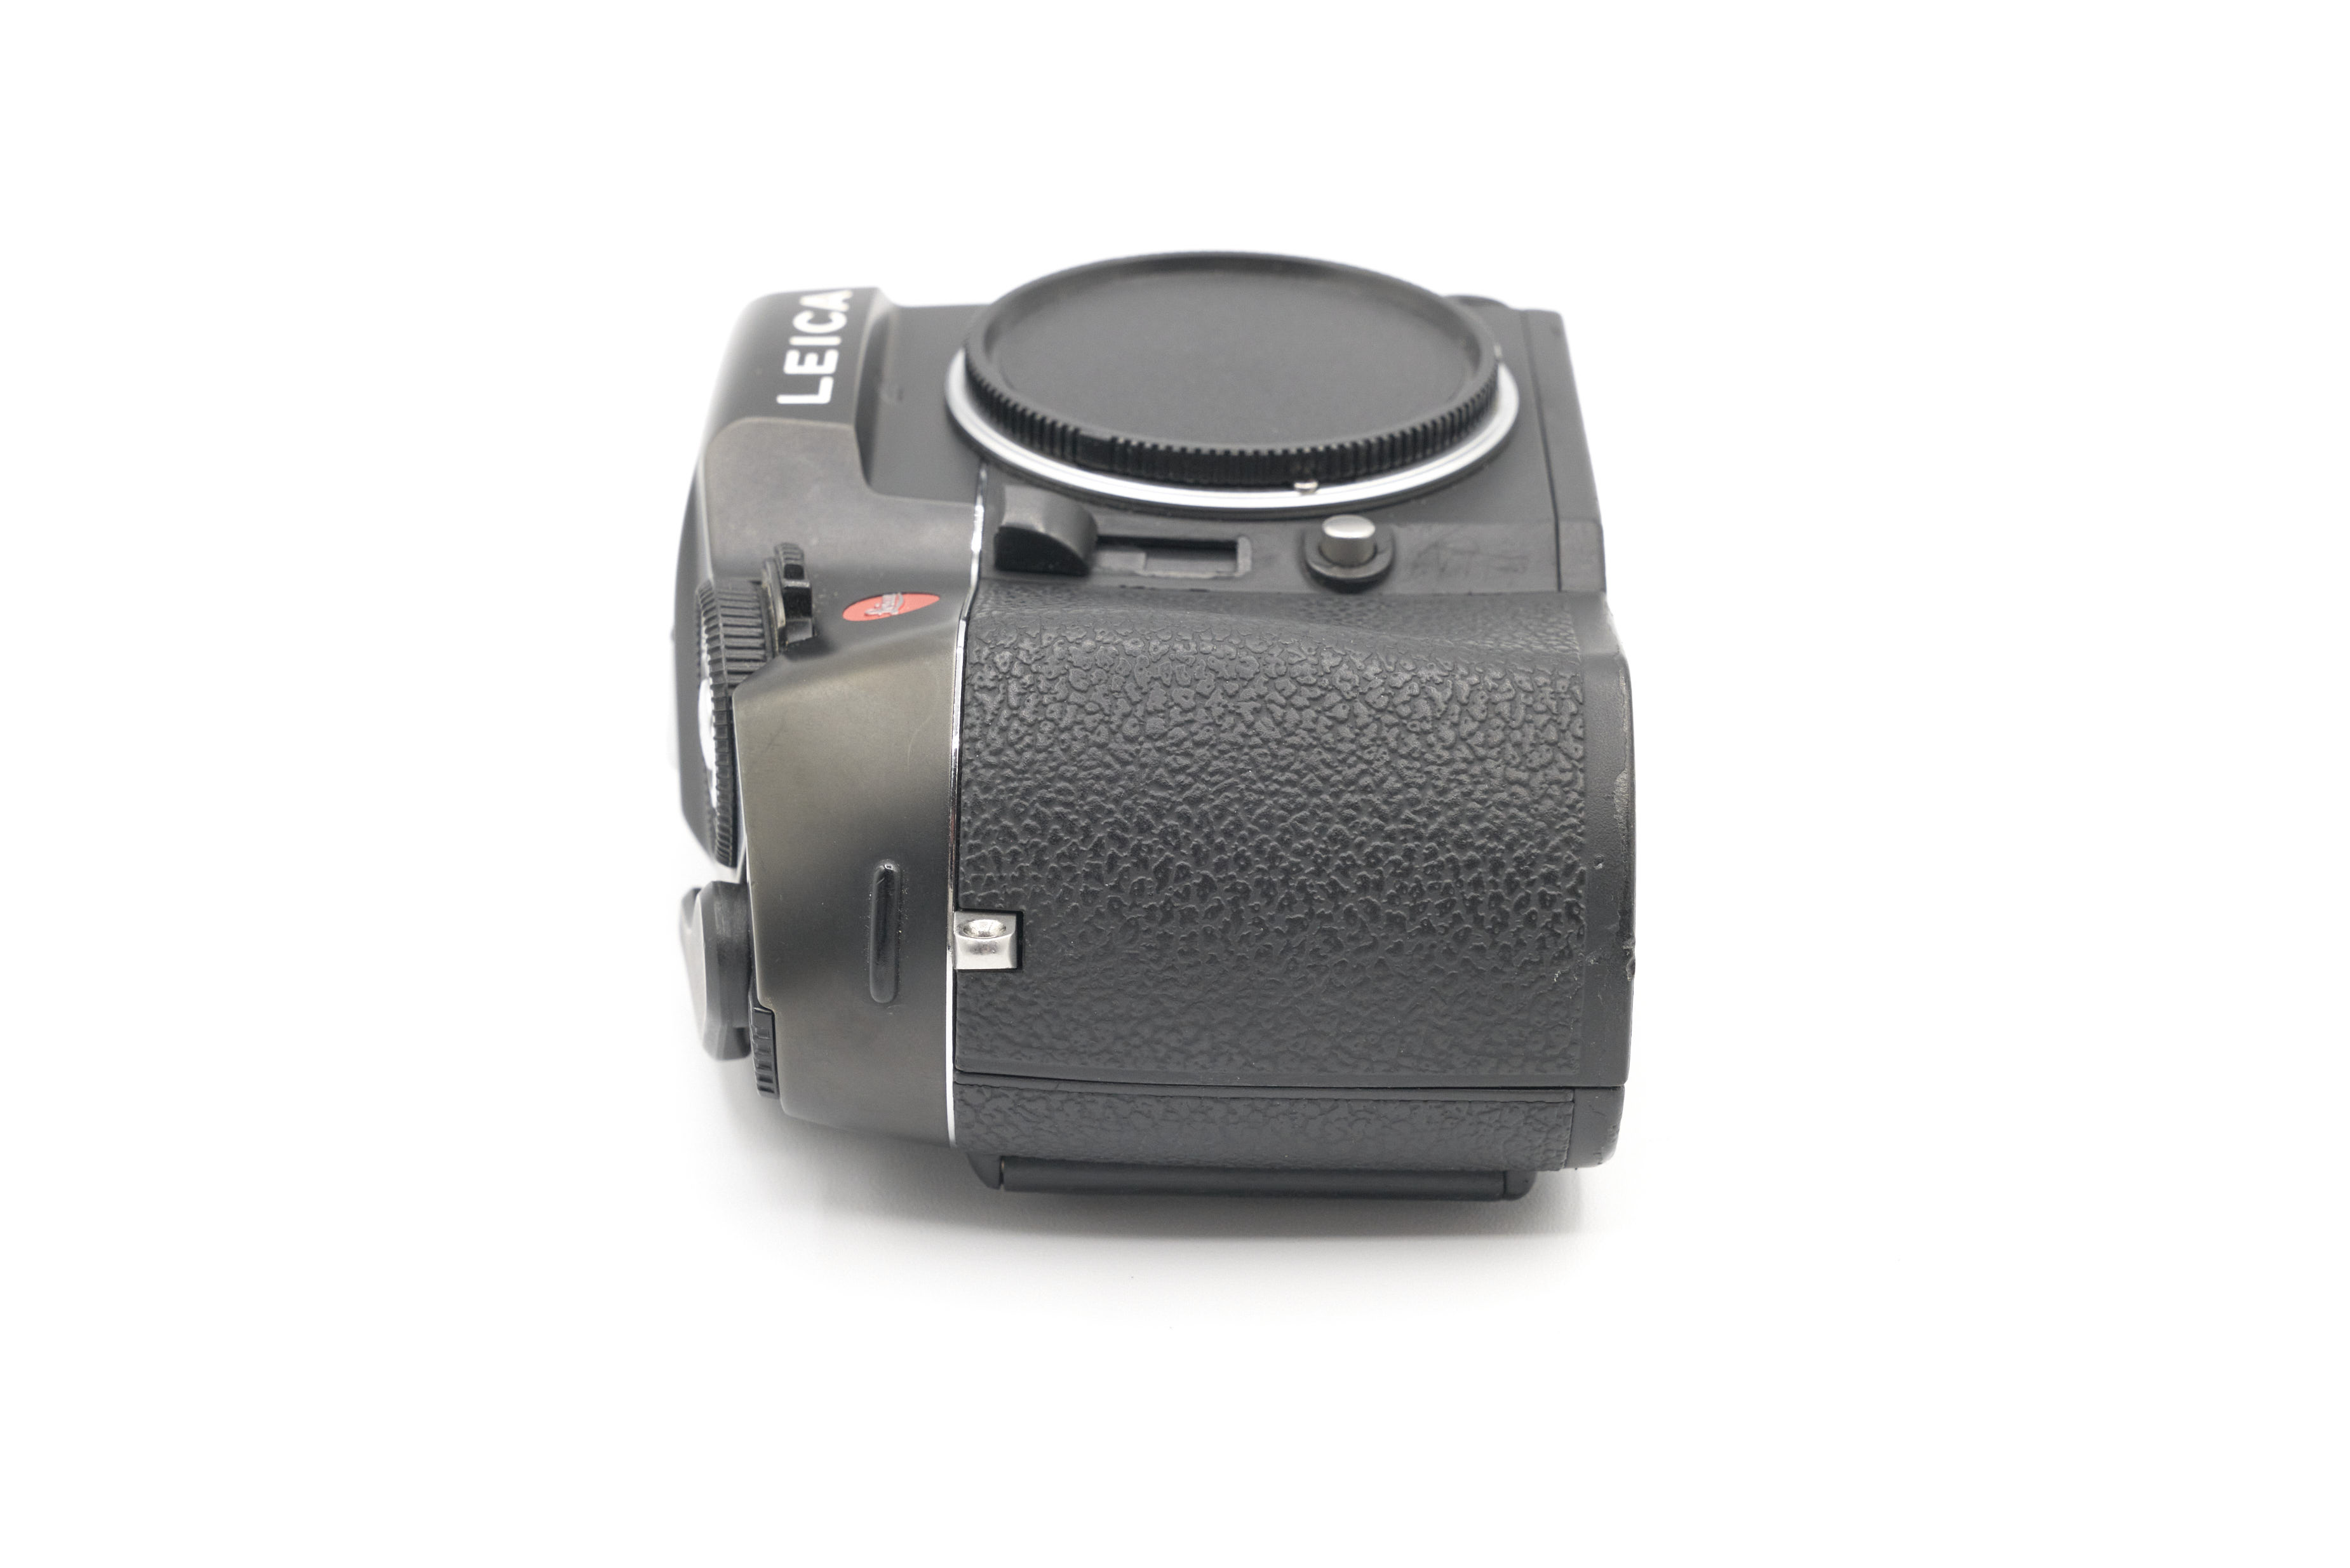 Leica R8 Black with Motor Winder (no battery cover) 10081